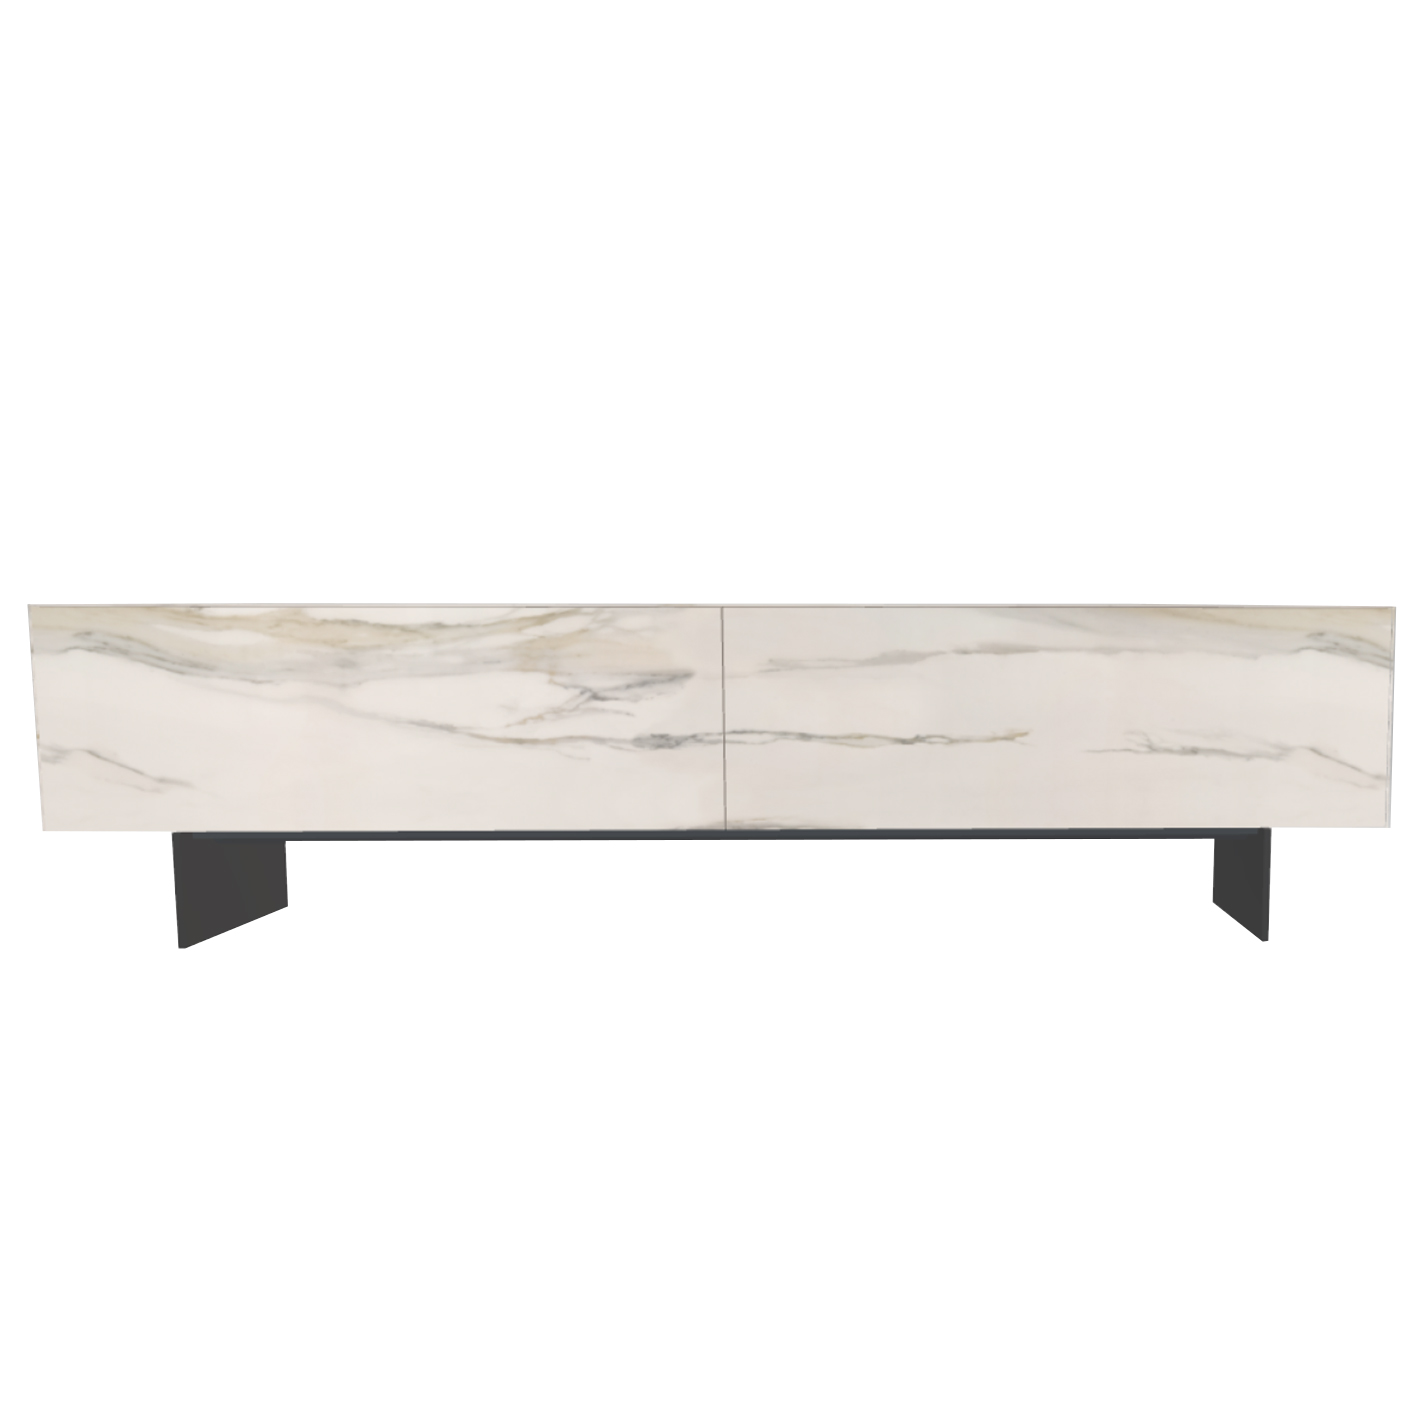 Lago xGlass - MATERIA 1049 XGLASS MARBLE OUTLET TV-Board